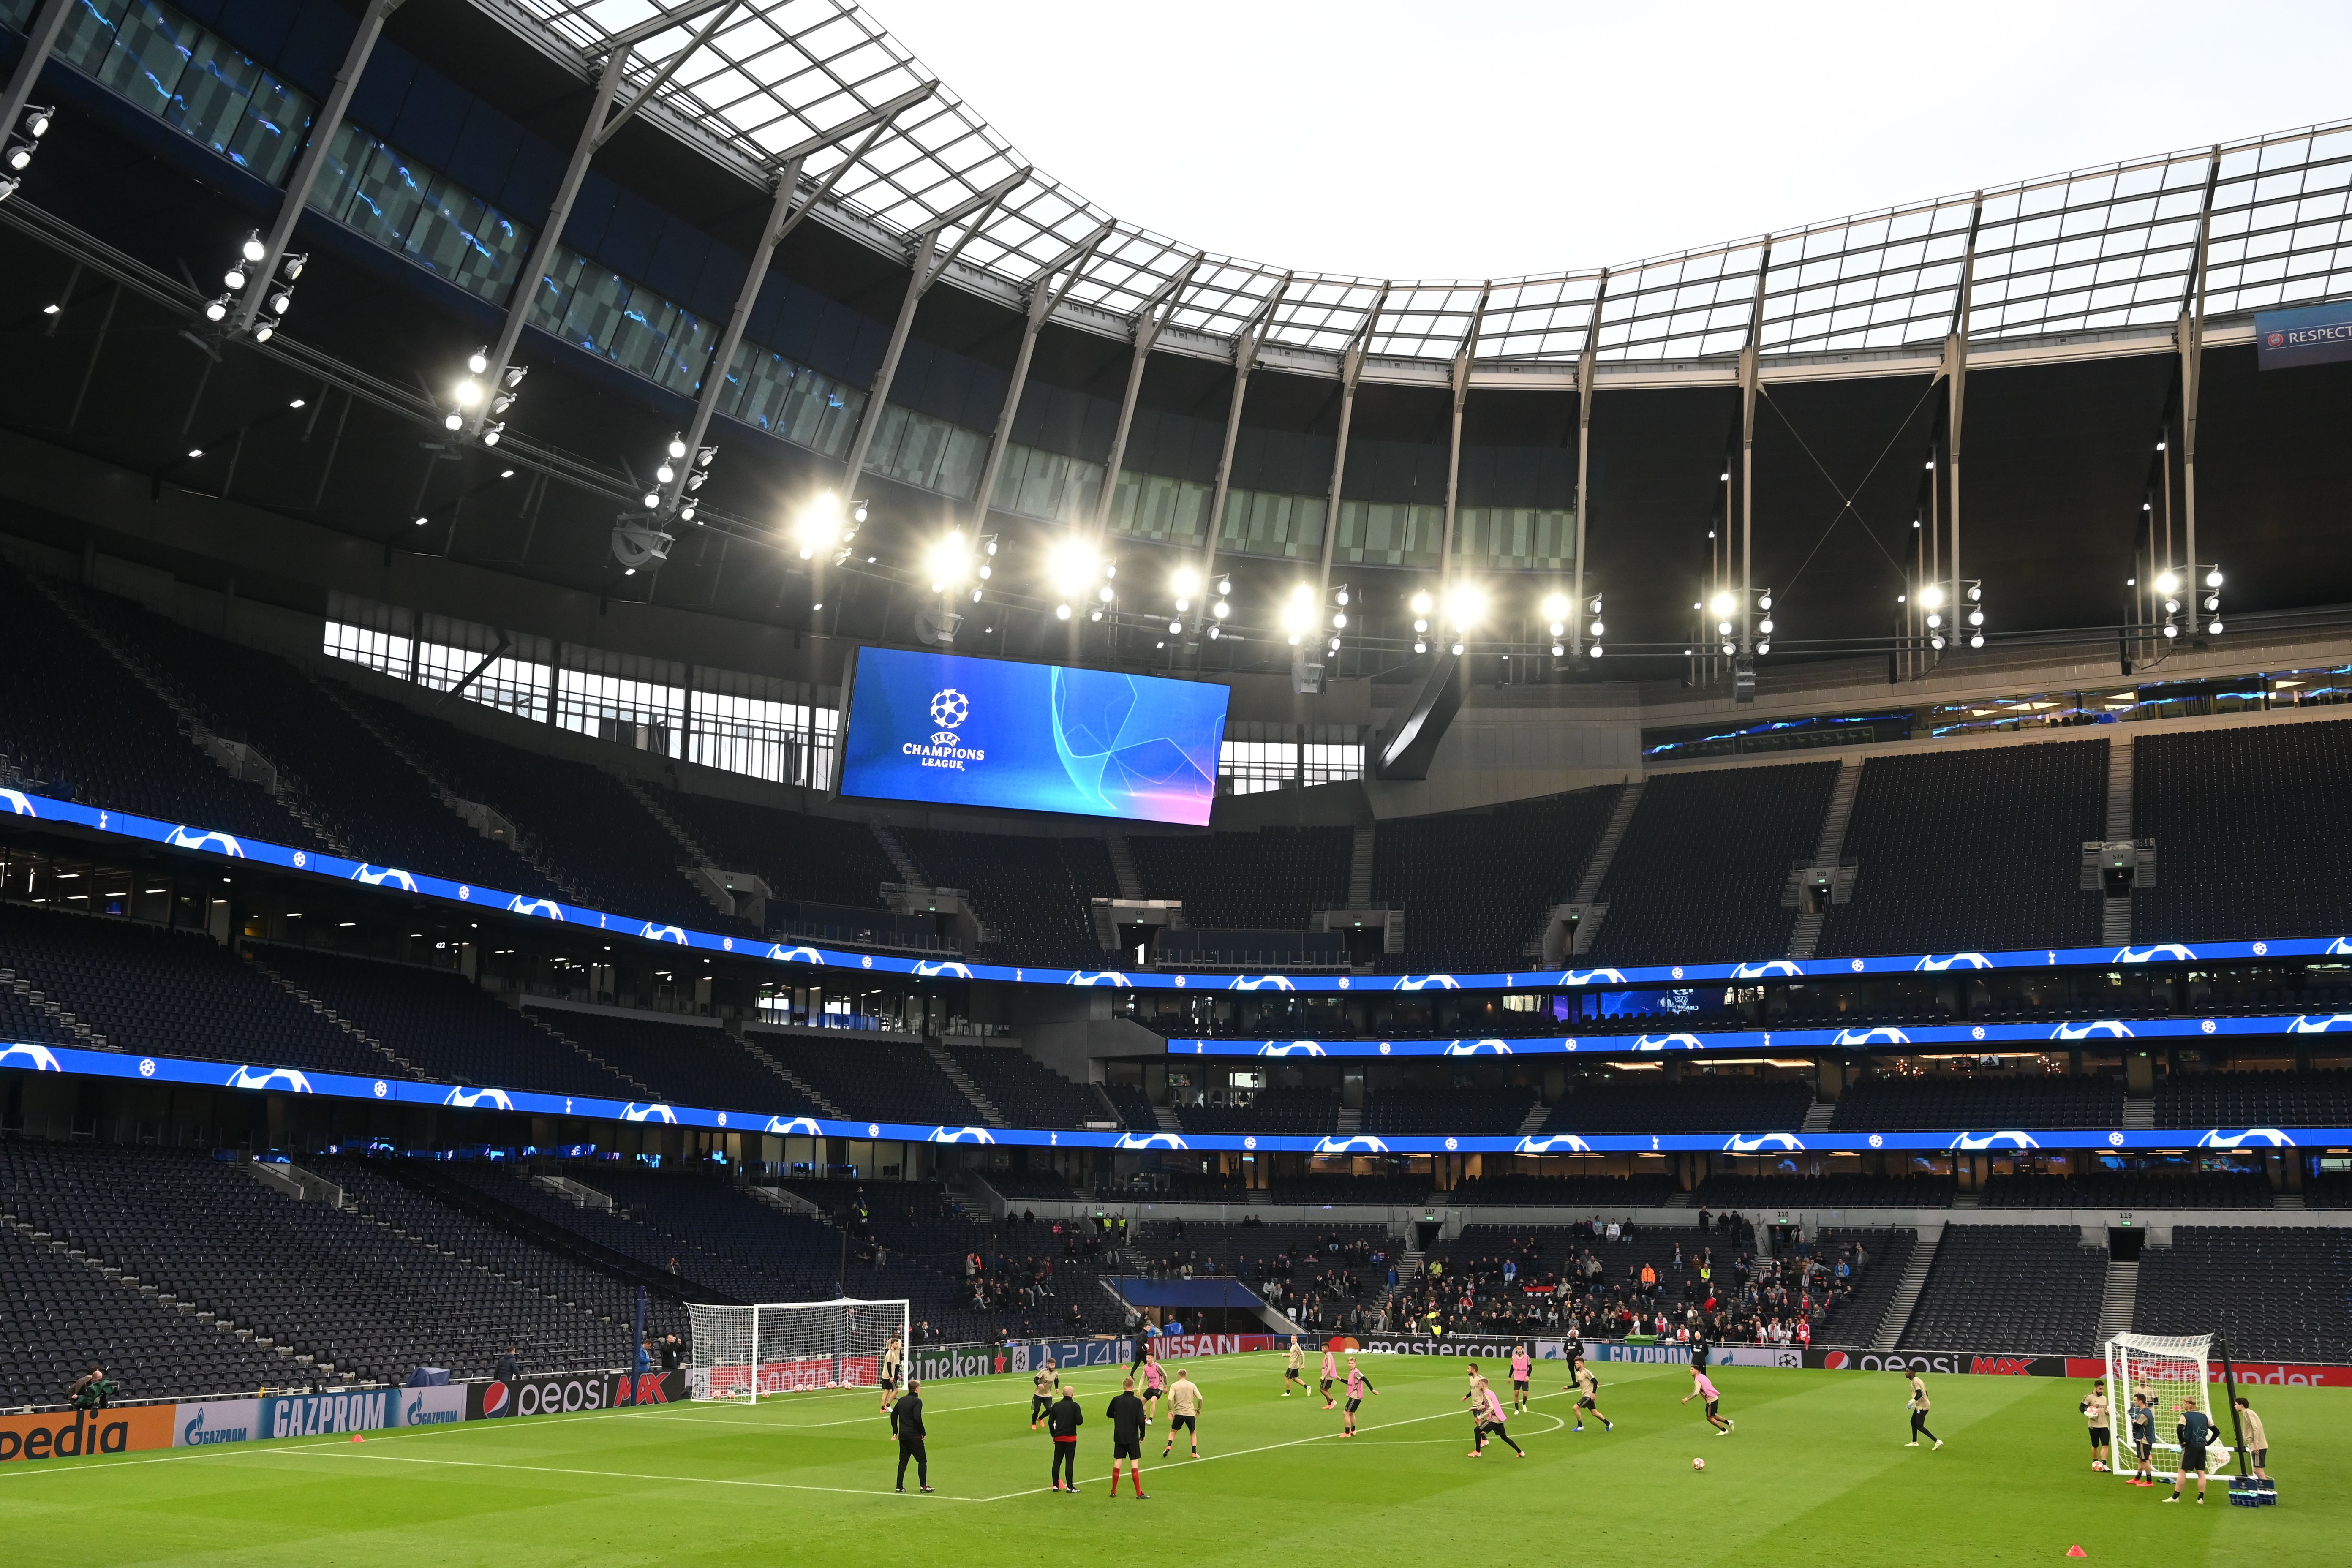 Ajax players take part in a training session at Tottenham Hotspur Stadium in London on April 29, 2019, on the eve of the UEFA Champions League semi-final first leg football match against Tottenham Hotspur. (Photo by EMMANUEL DUNAND / AFP)        (Photo credit should read EMMANUEL DUNAND/AFP/Getty Images)